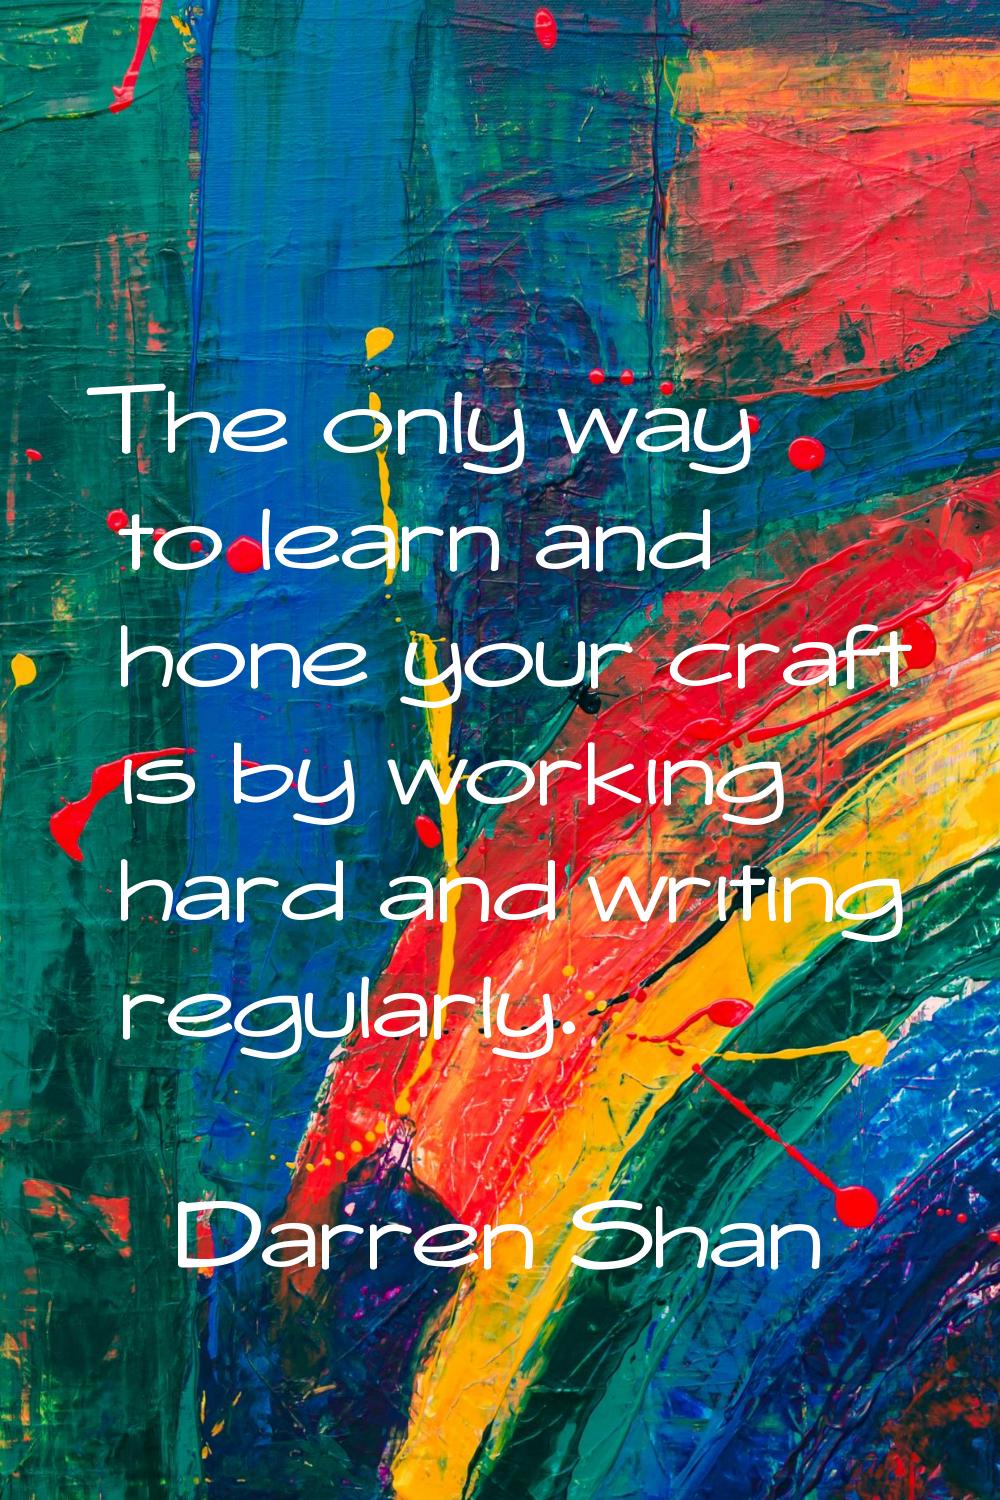 The only way to learn and hone your craft is by working hard and writing regularly.